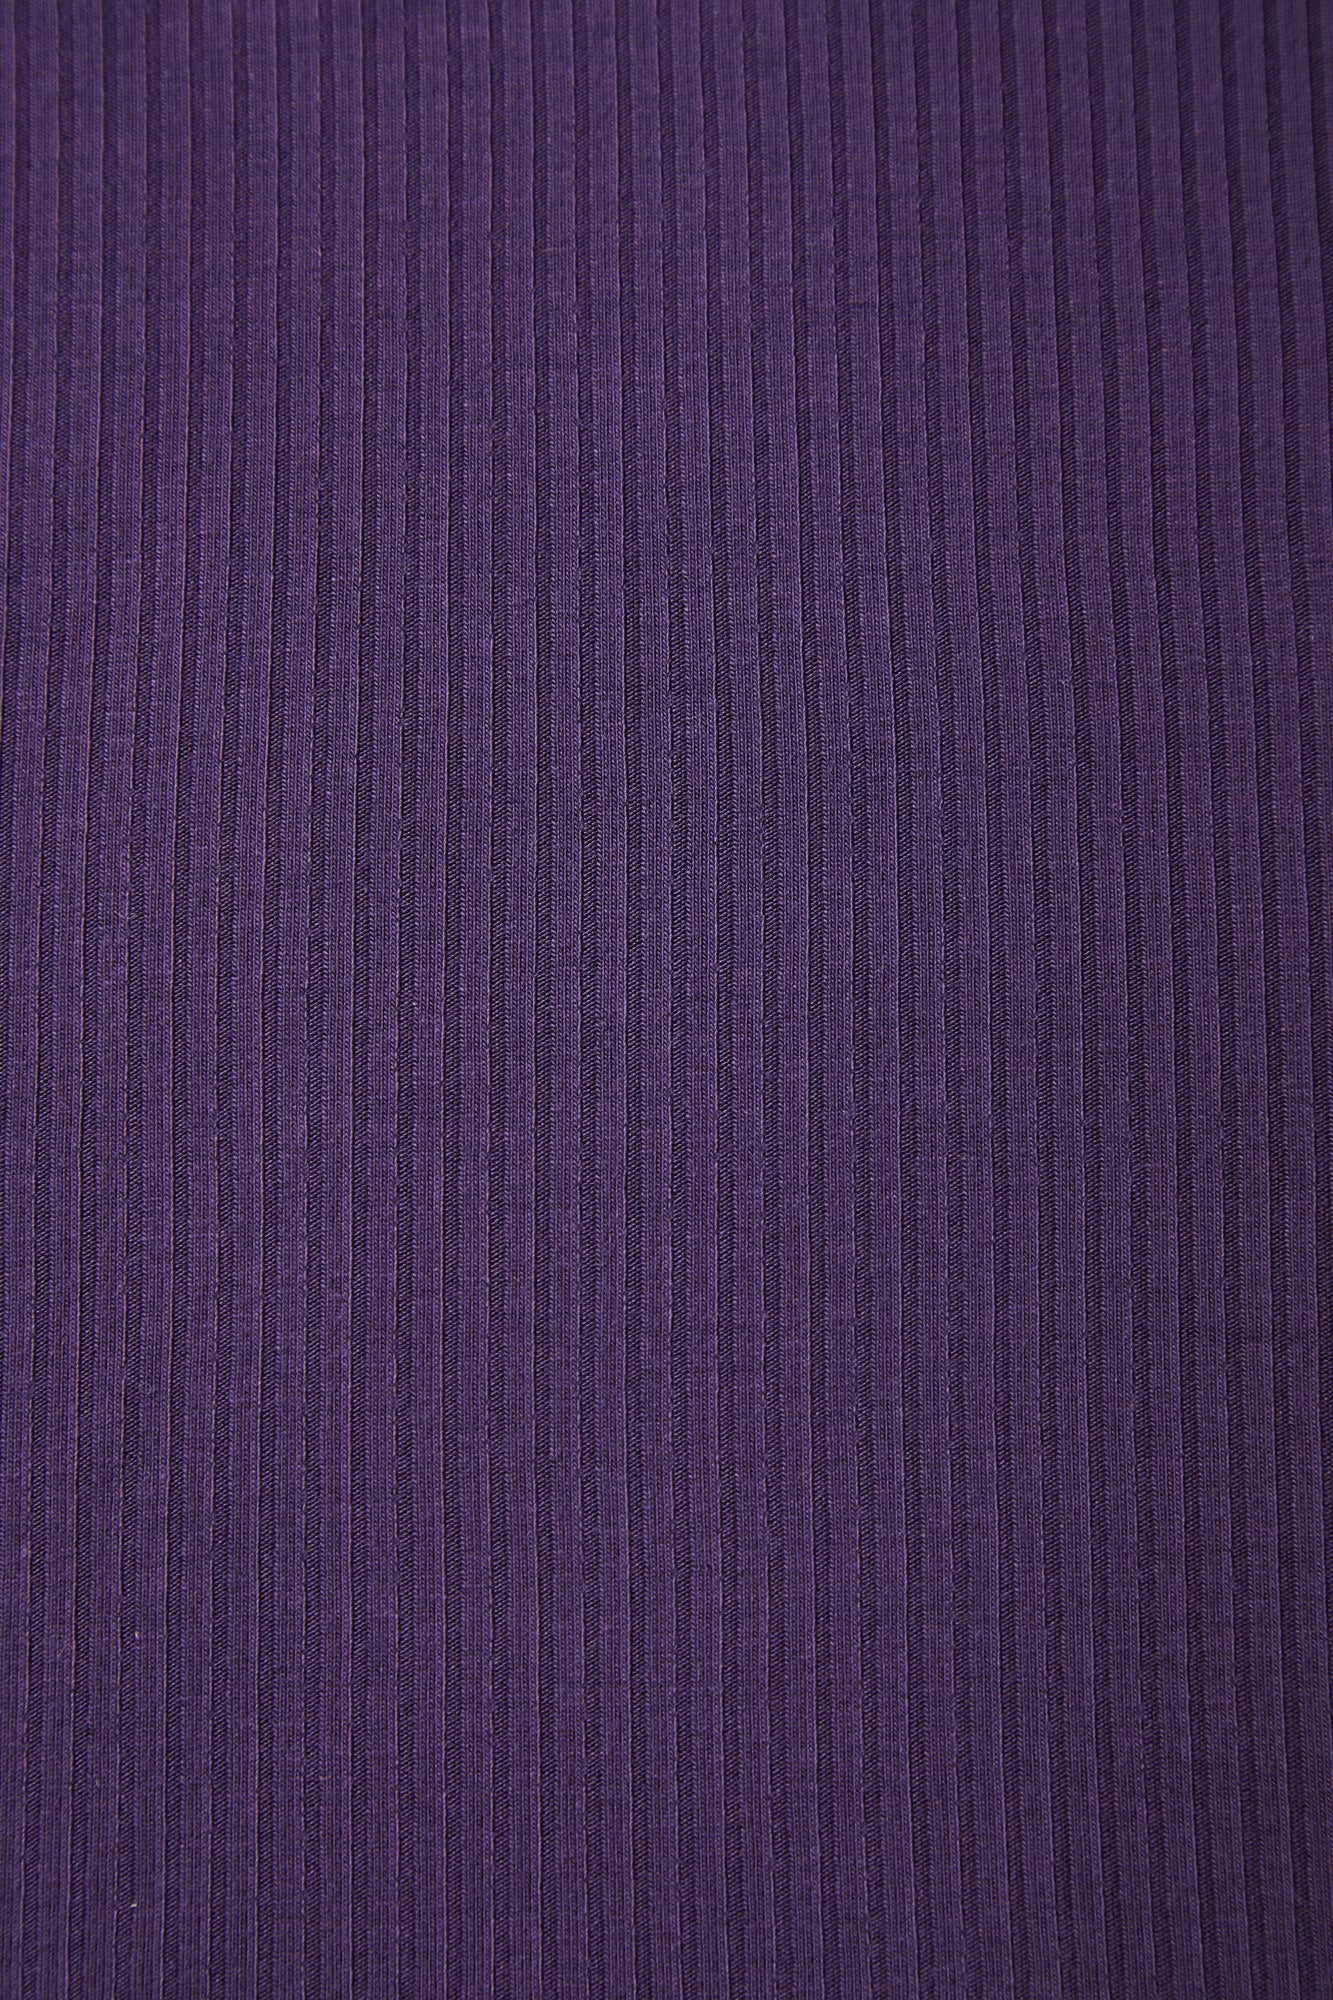 Derby Ribbed Jersey Purple Night with TENCEL™ Modal Fibres